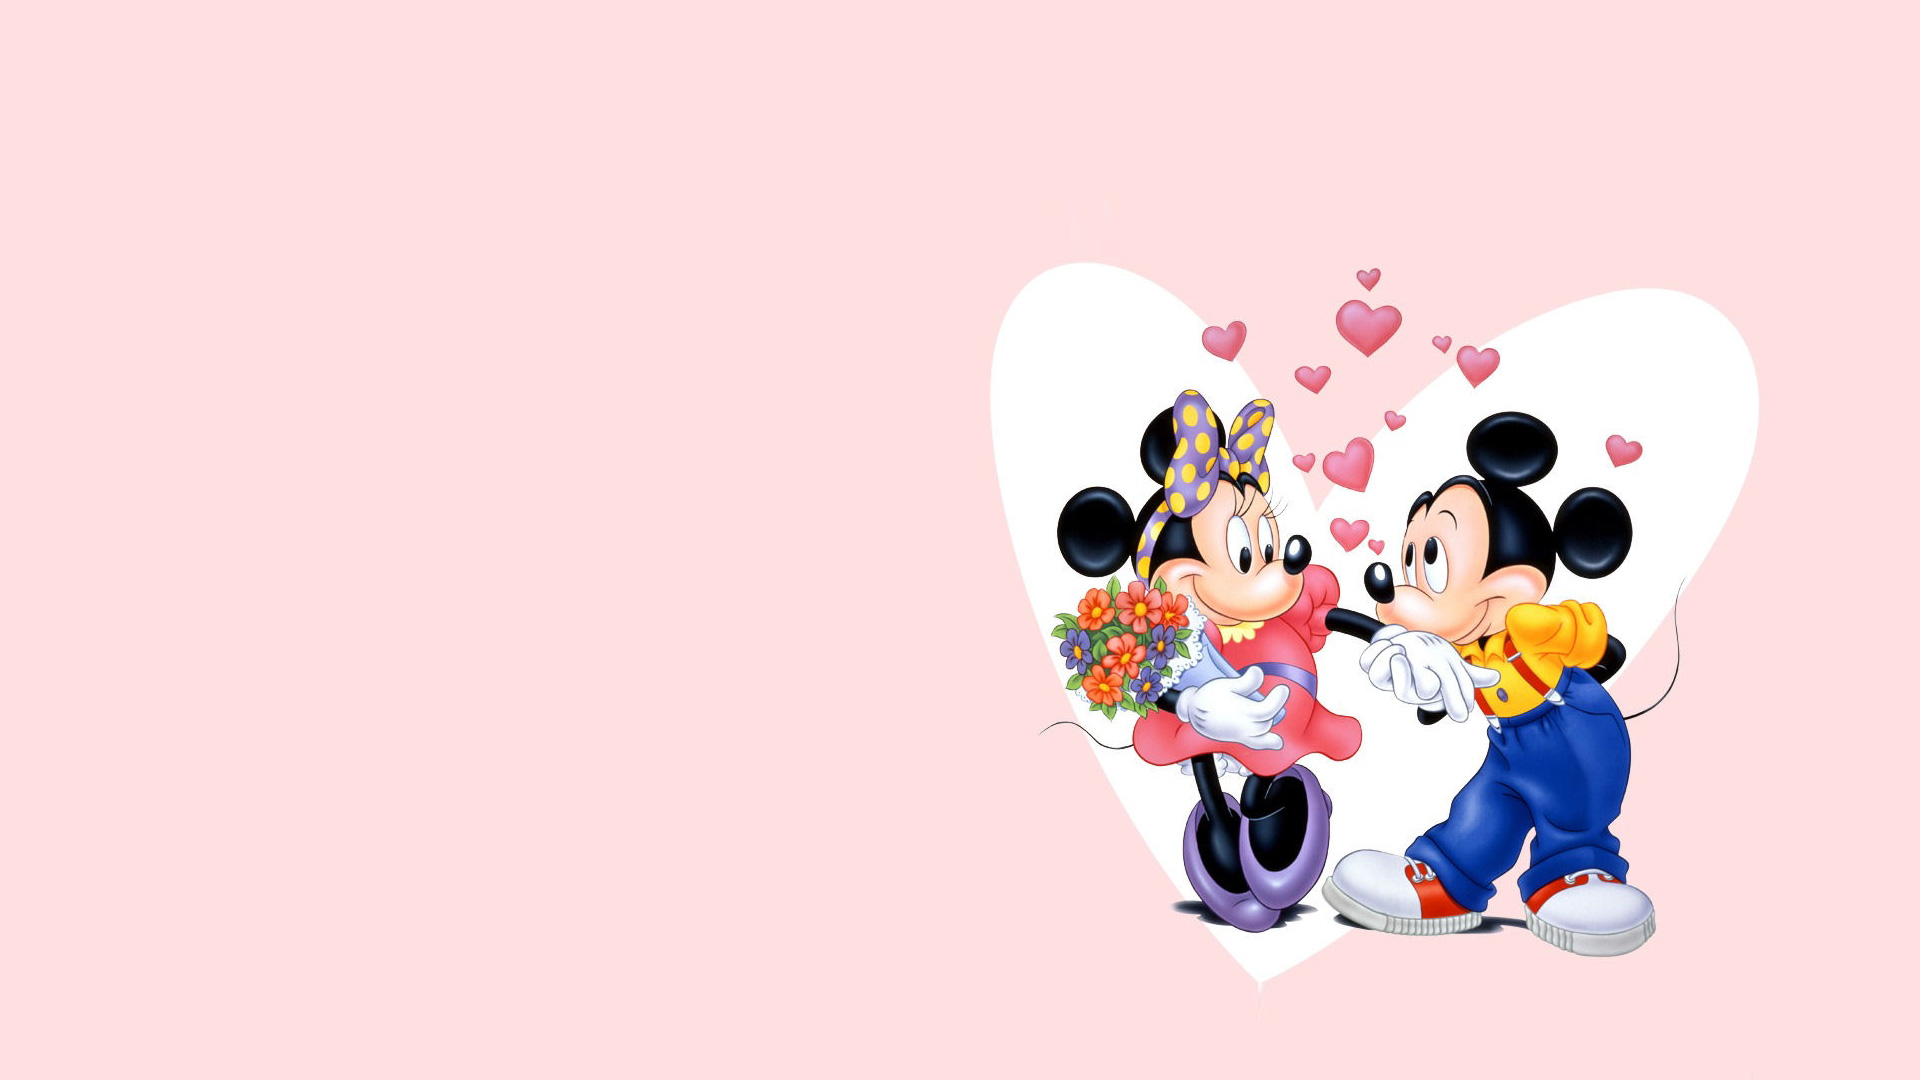 Right click the HD 1920 x 1080 Minnie Mouse wallpaper image and choose